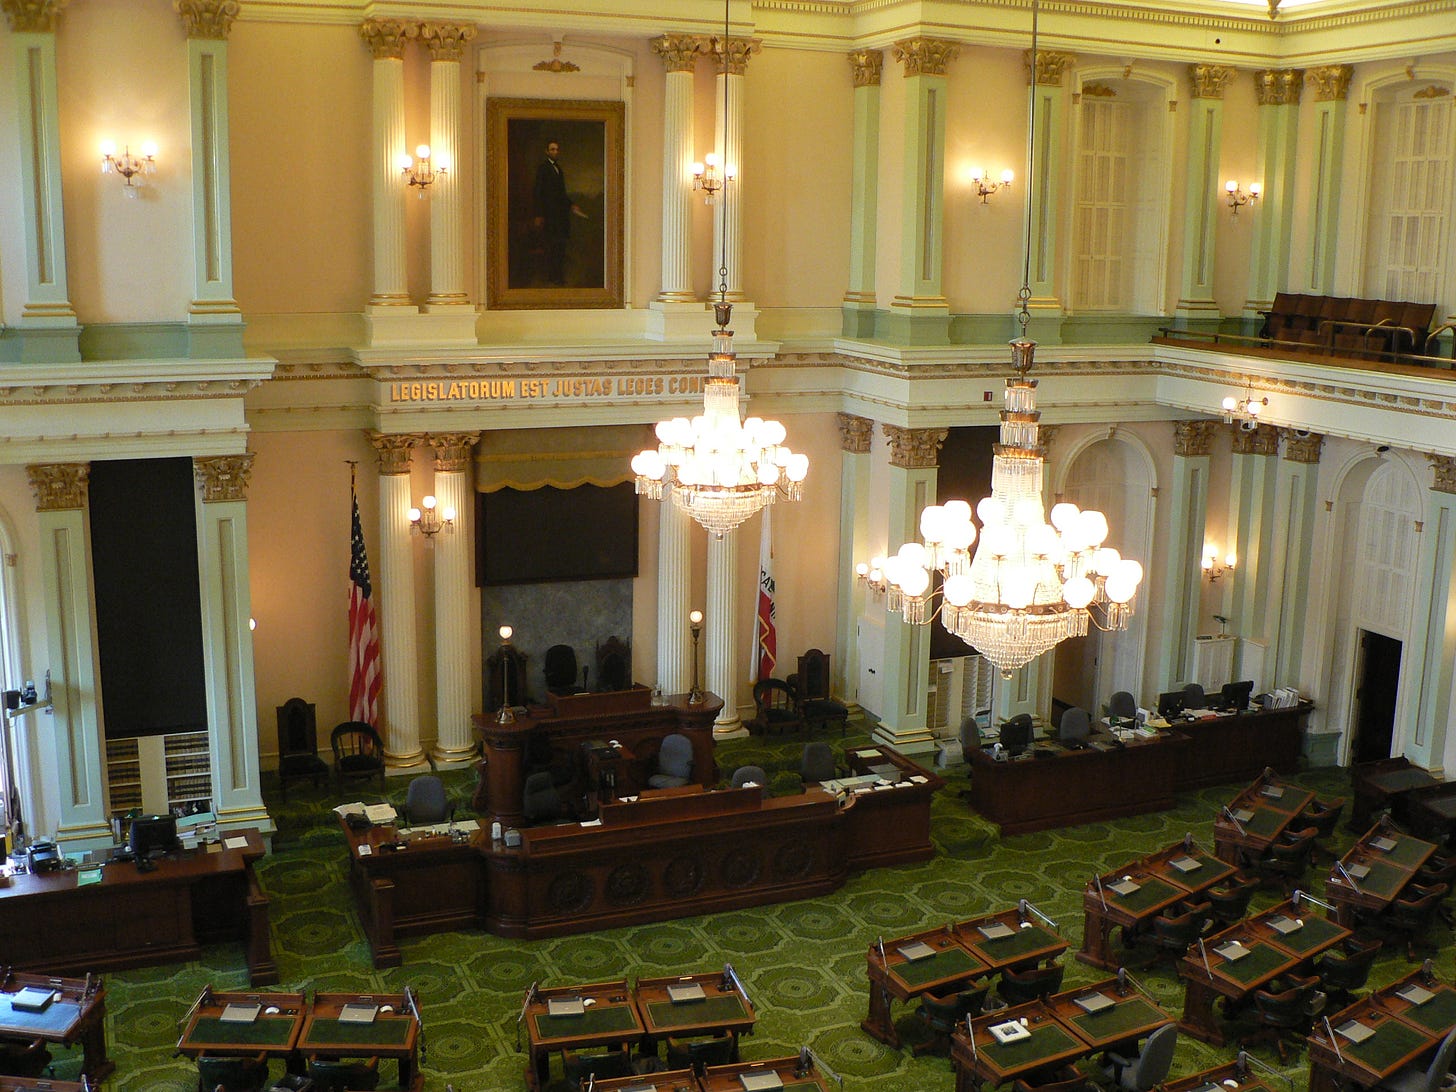 File:California State Assembly room p1080879.jpg - Wikimedia Commons